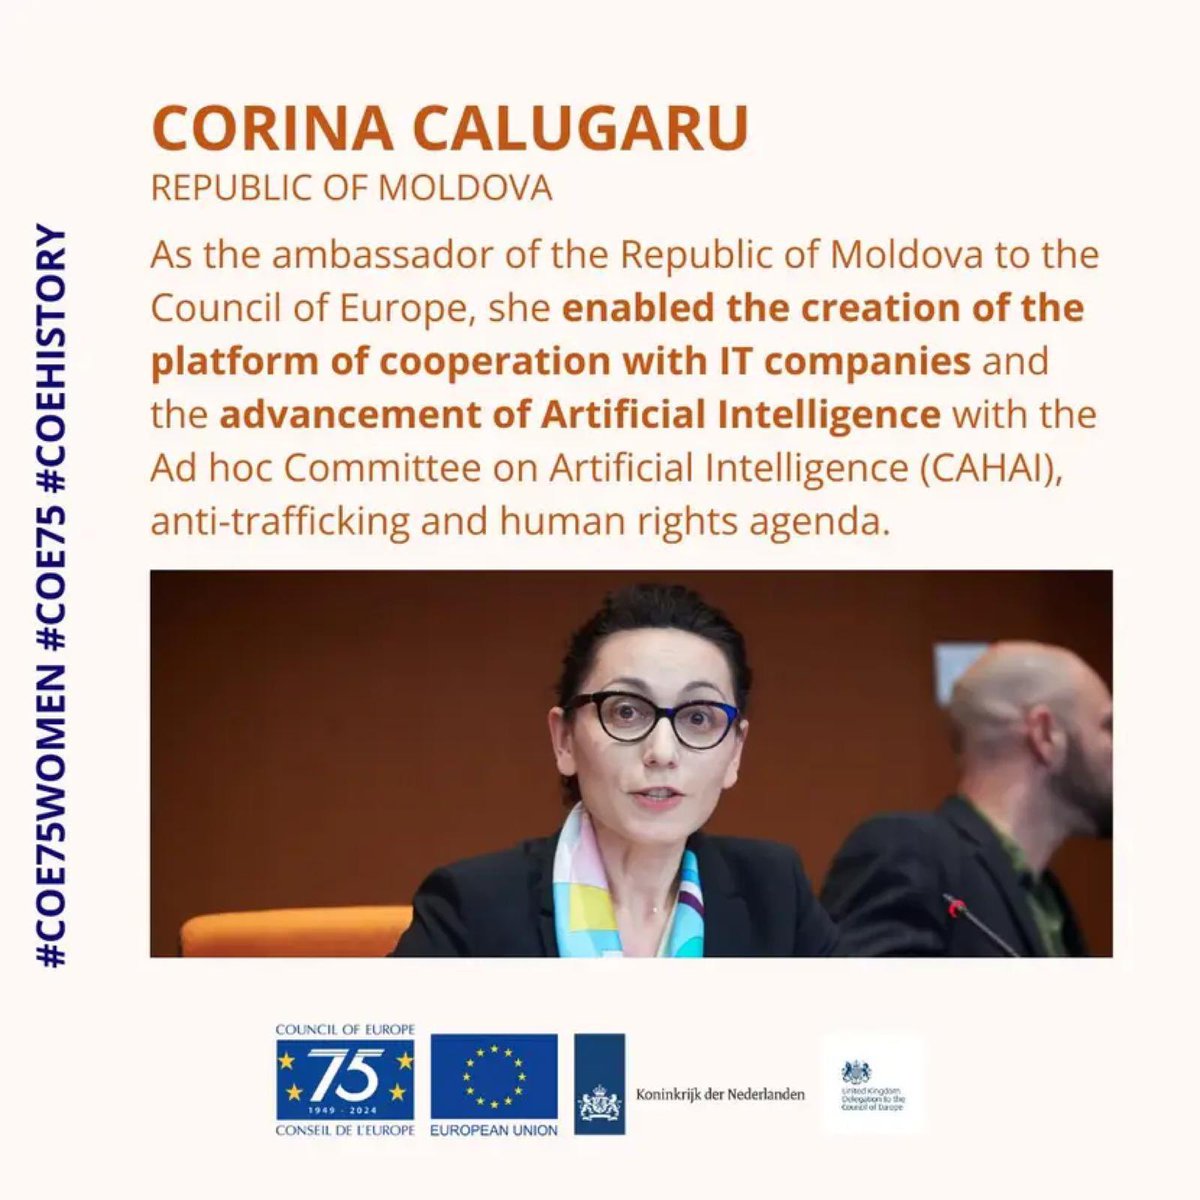 Honored and proud to find myself in the project #Coe75Women and while serving my country in Strasbourg, I was able to contribute to the values and agenda of the @coe #HumanRights #ArtificialInteligence 
Thank you to all my colleagues
@MoldovaMFA @MoldovaCoE @UKDelCoE @EUDELCoE